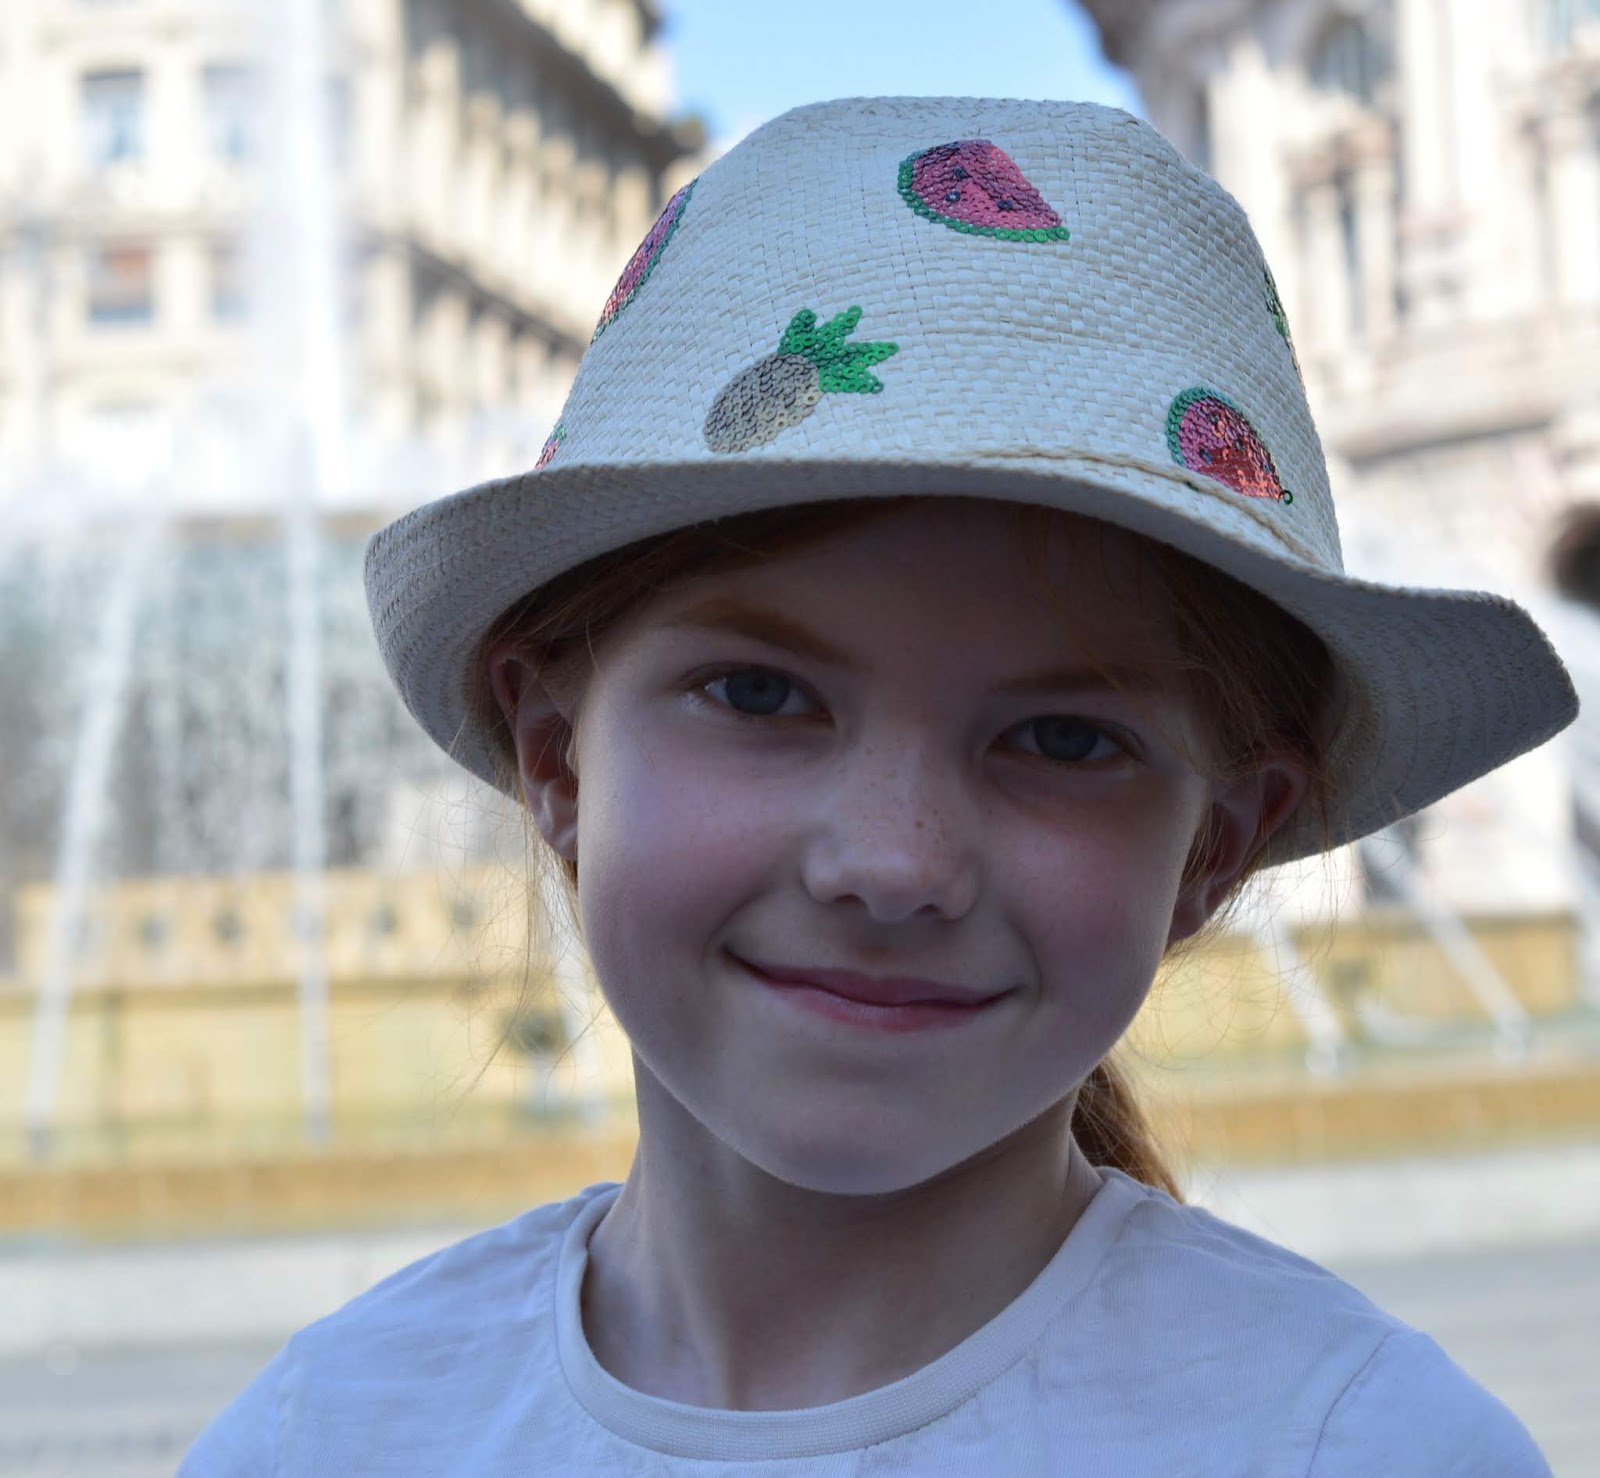 How to spend a weekend in Genoa with kids - main square fountains